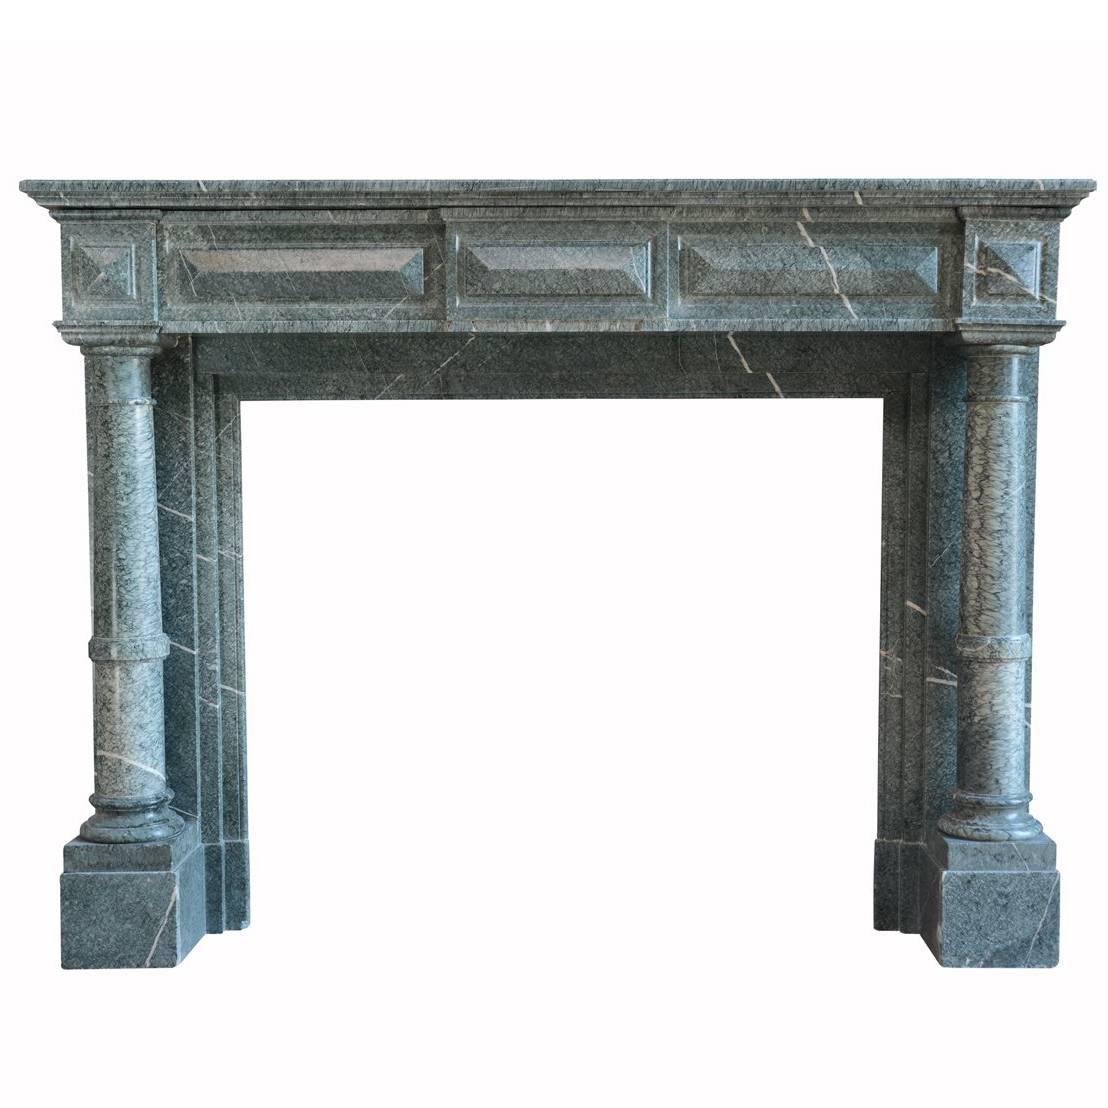 Napoleon III Fireplace in Green Marble of Serravezza, 19th Century For Sale